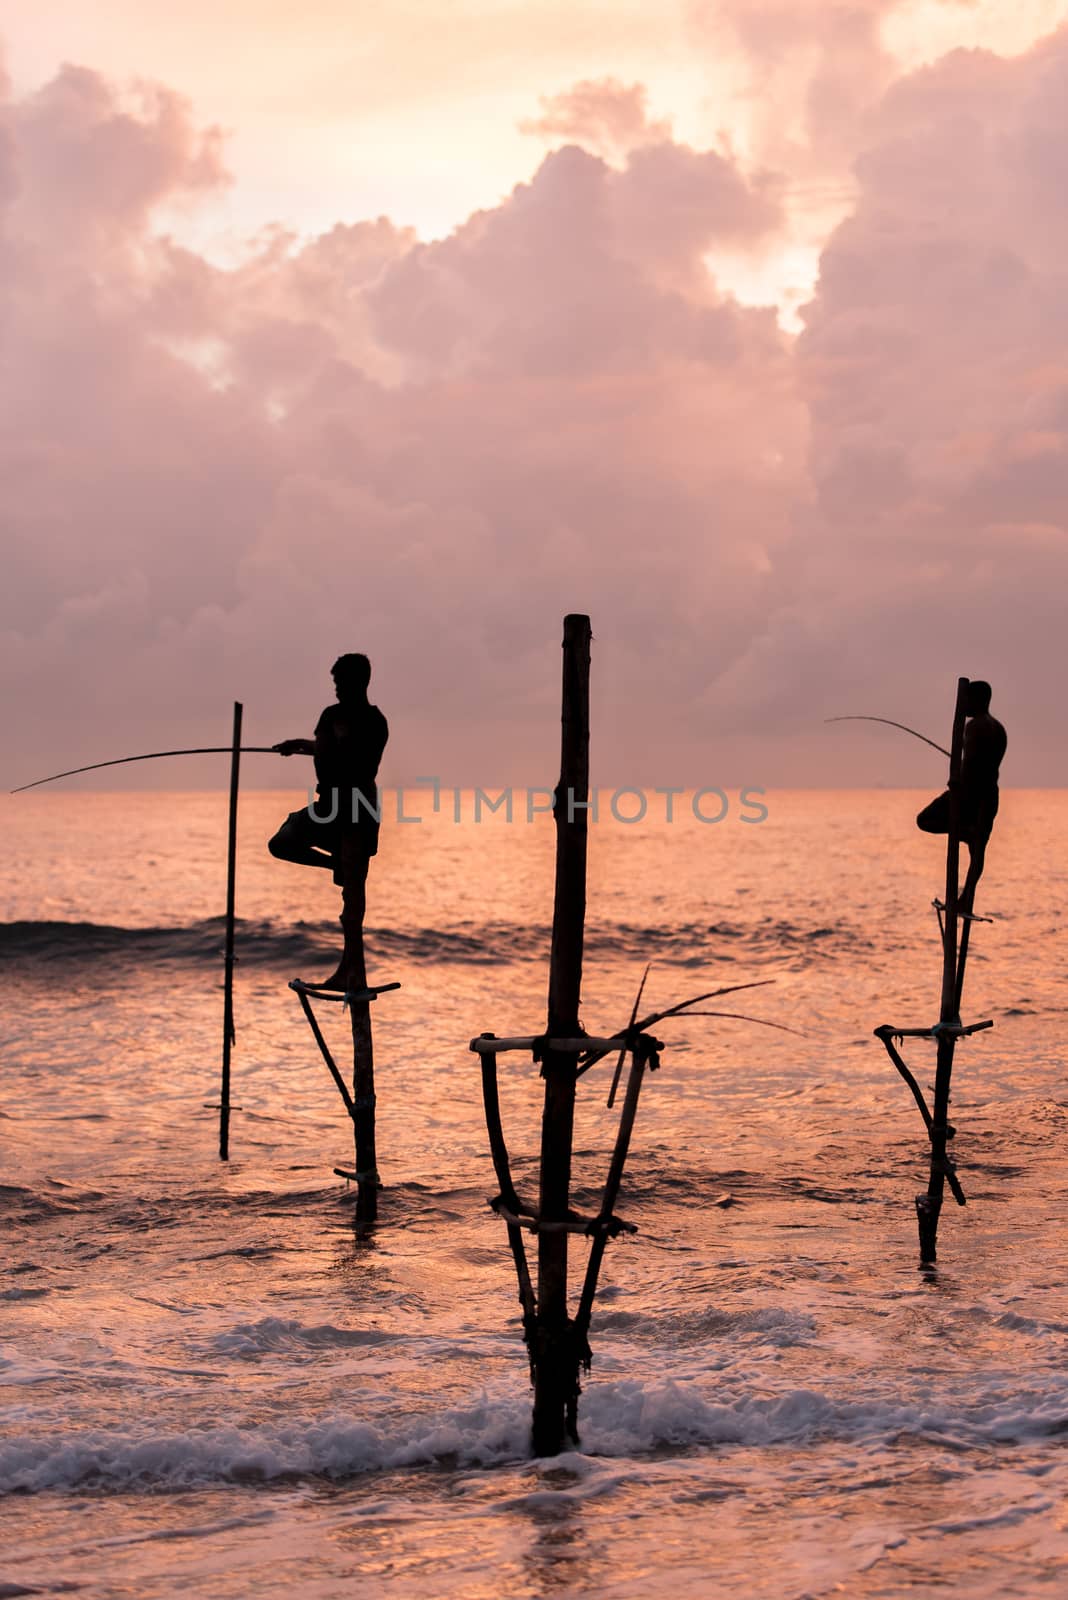 Silhouettes of the traditional Sri Lankan stilt fishermen on a stormy in Koggala, Sri Lanka. Stilt fishing is a method of fishing unique to the island country of Sri Lanka by martinscphoto